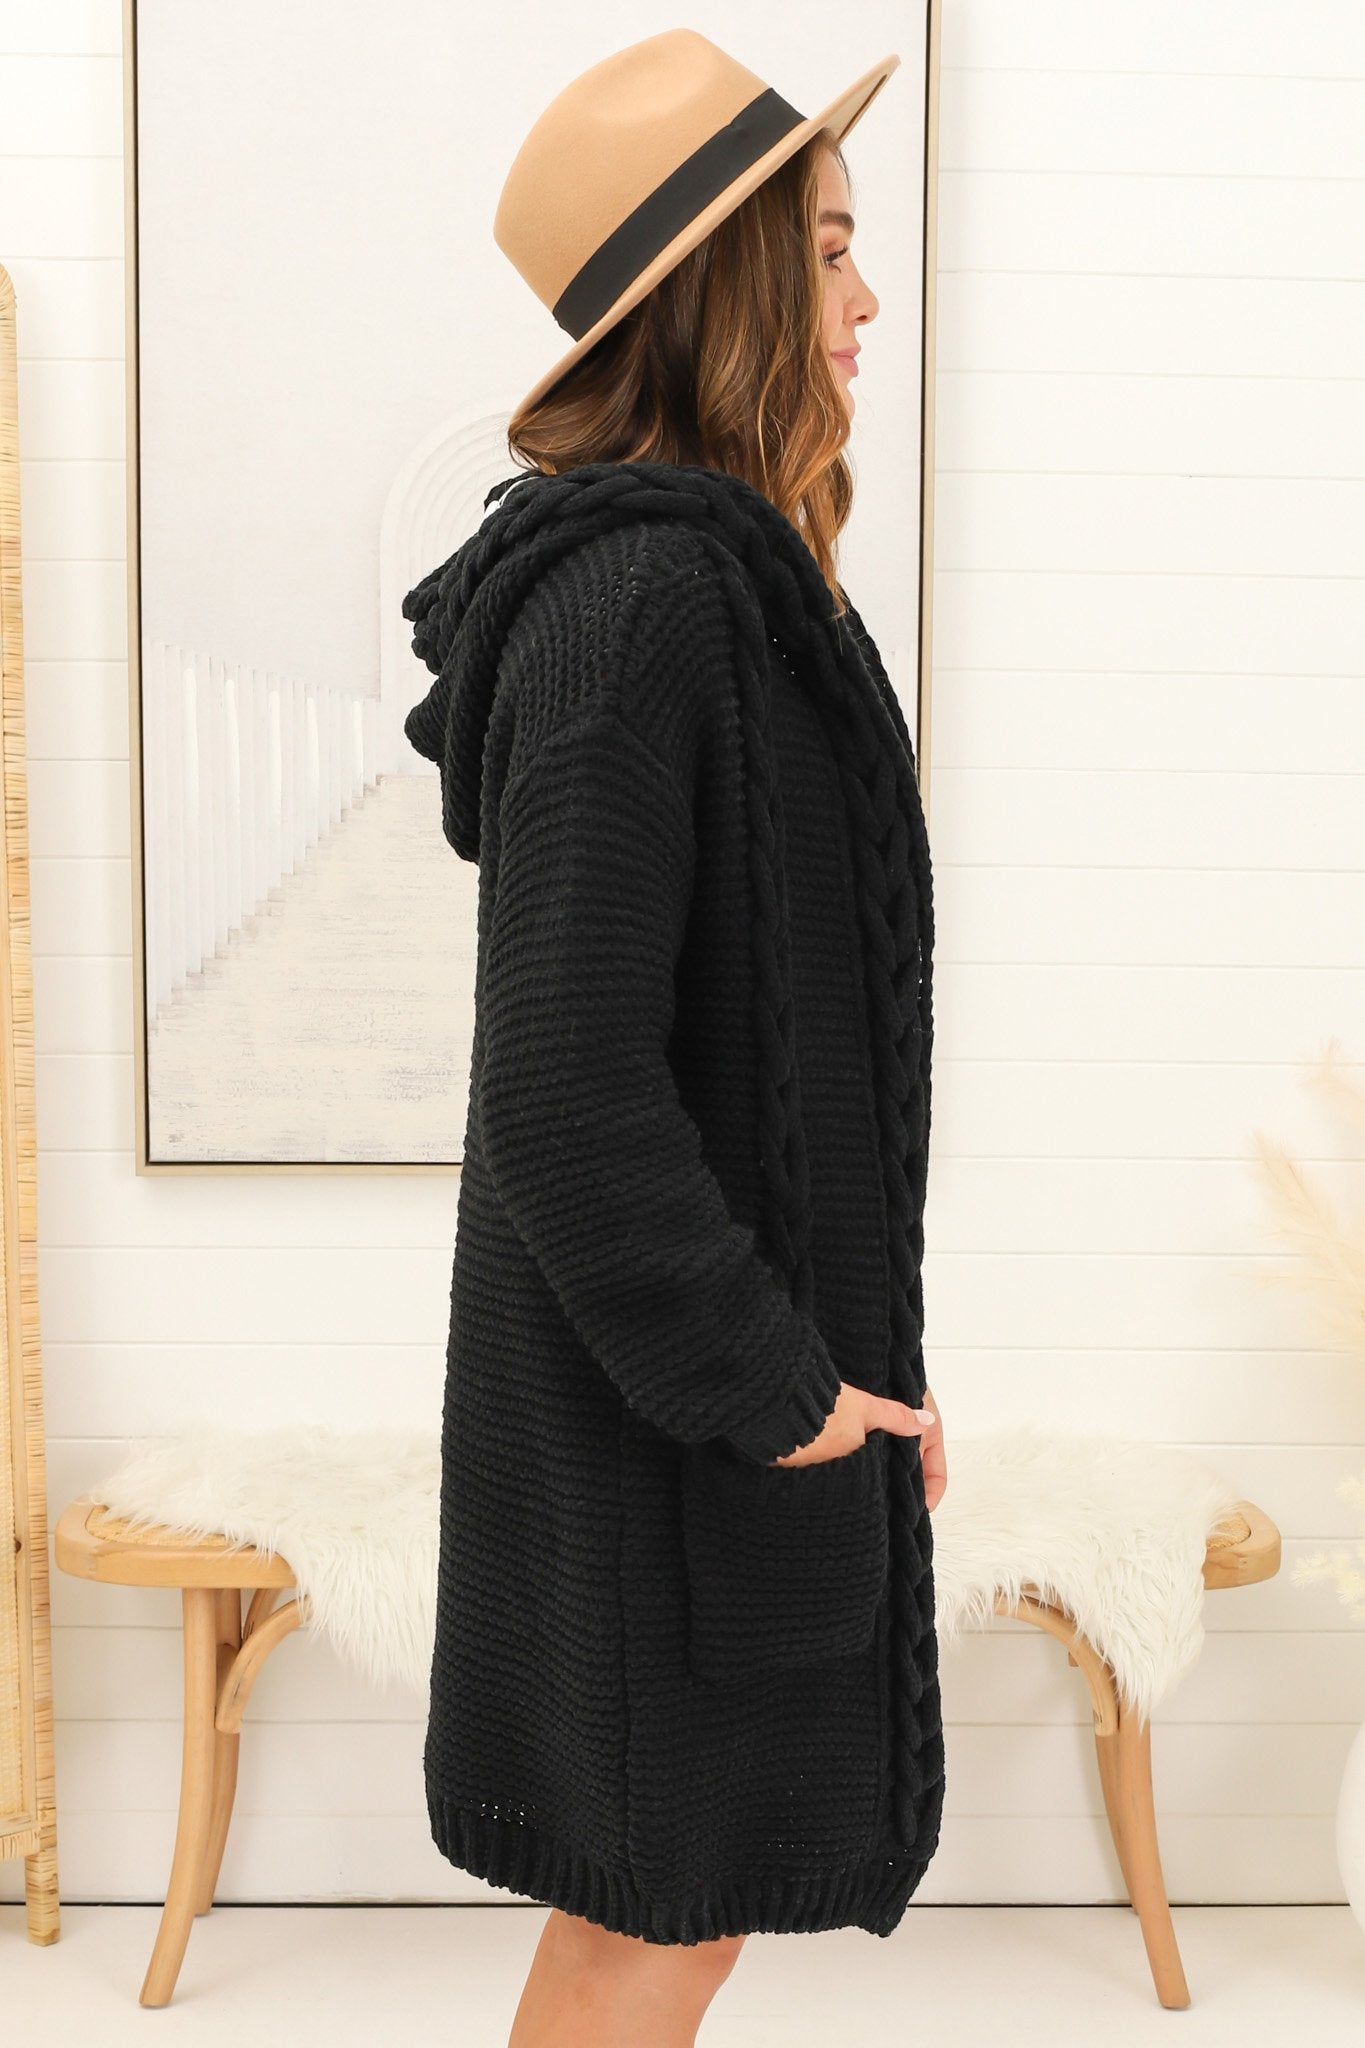 Toolara Cardigan - Thick Cable Knit Hooded Cardigan with Pocket in Black